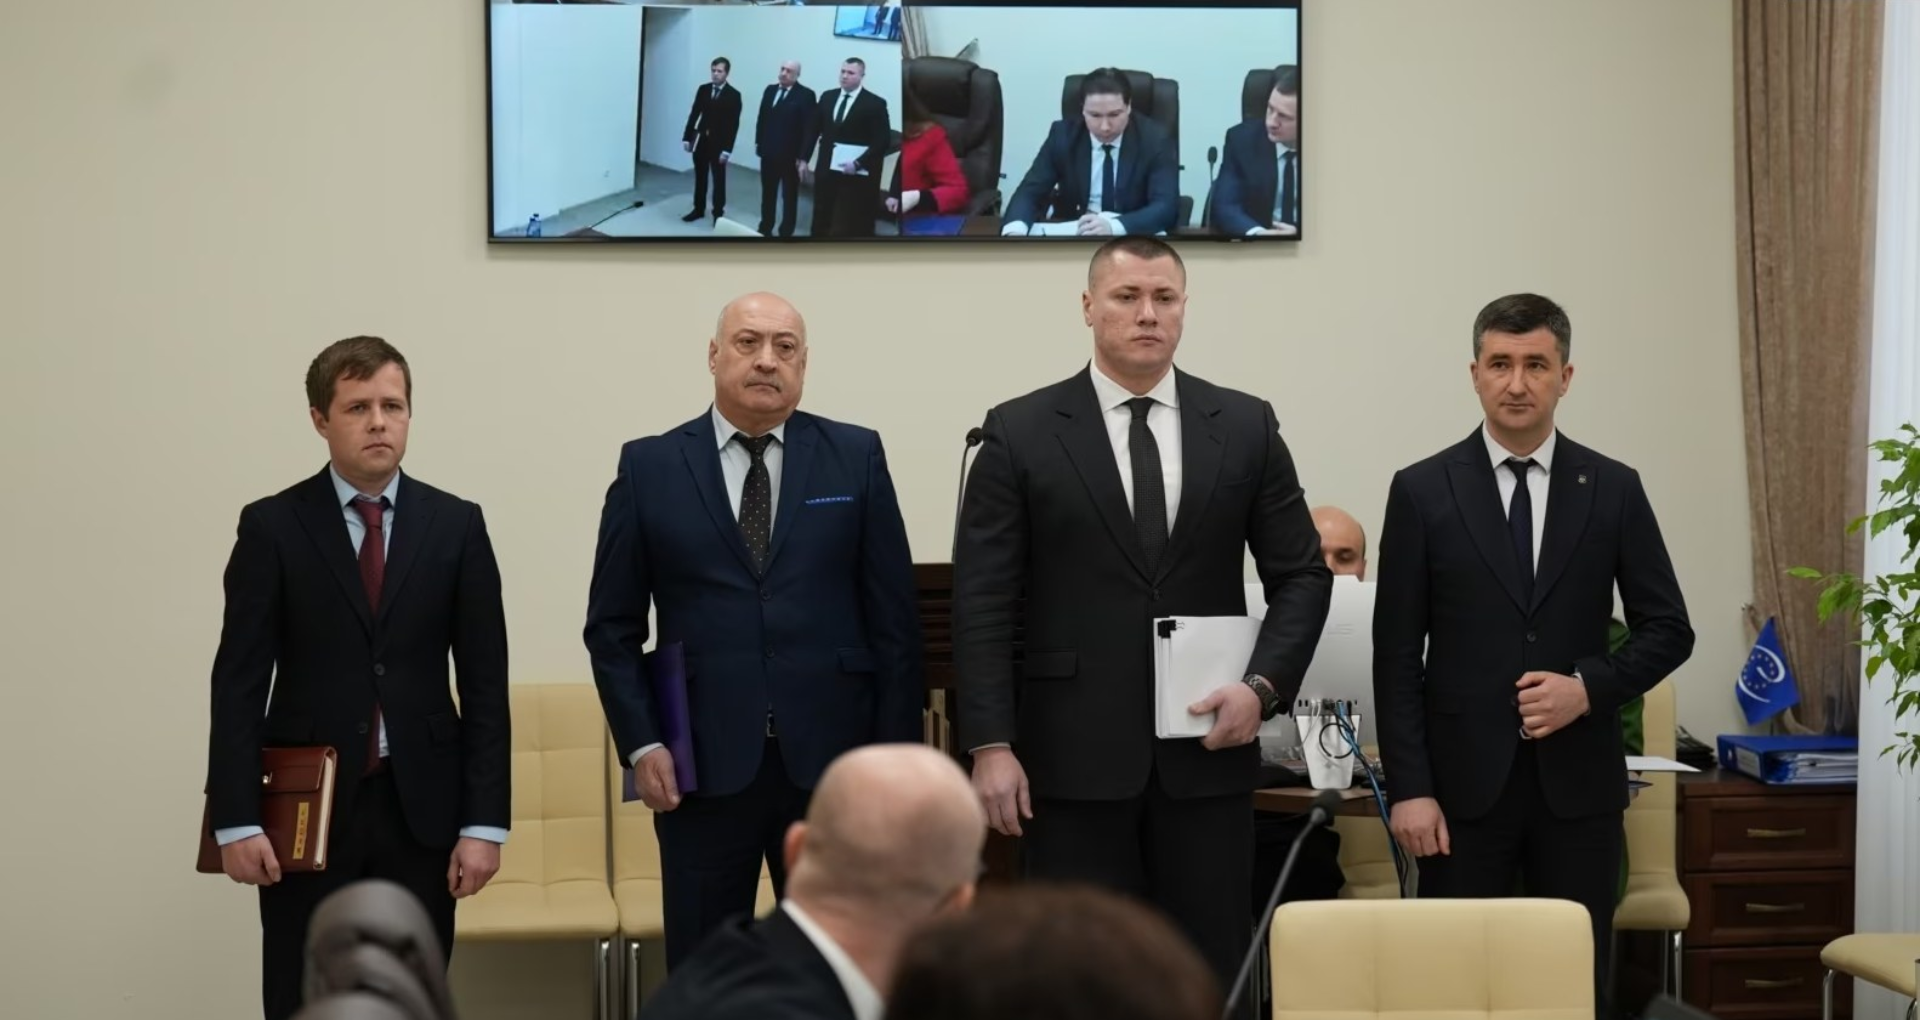 The file of former Intelligence and Security Service chief Vasile Botnari has been declassified: details of the illegal expulsion of seven Turkish teachers